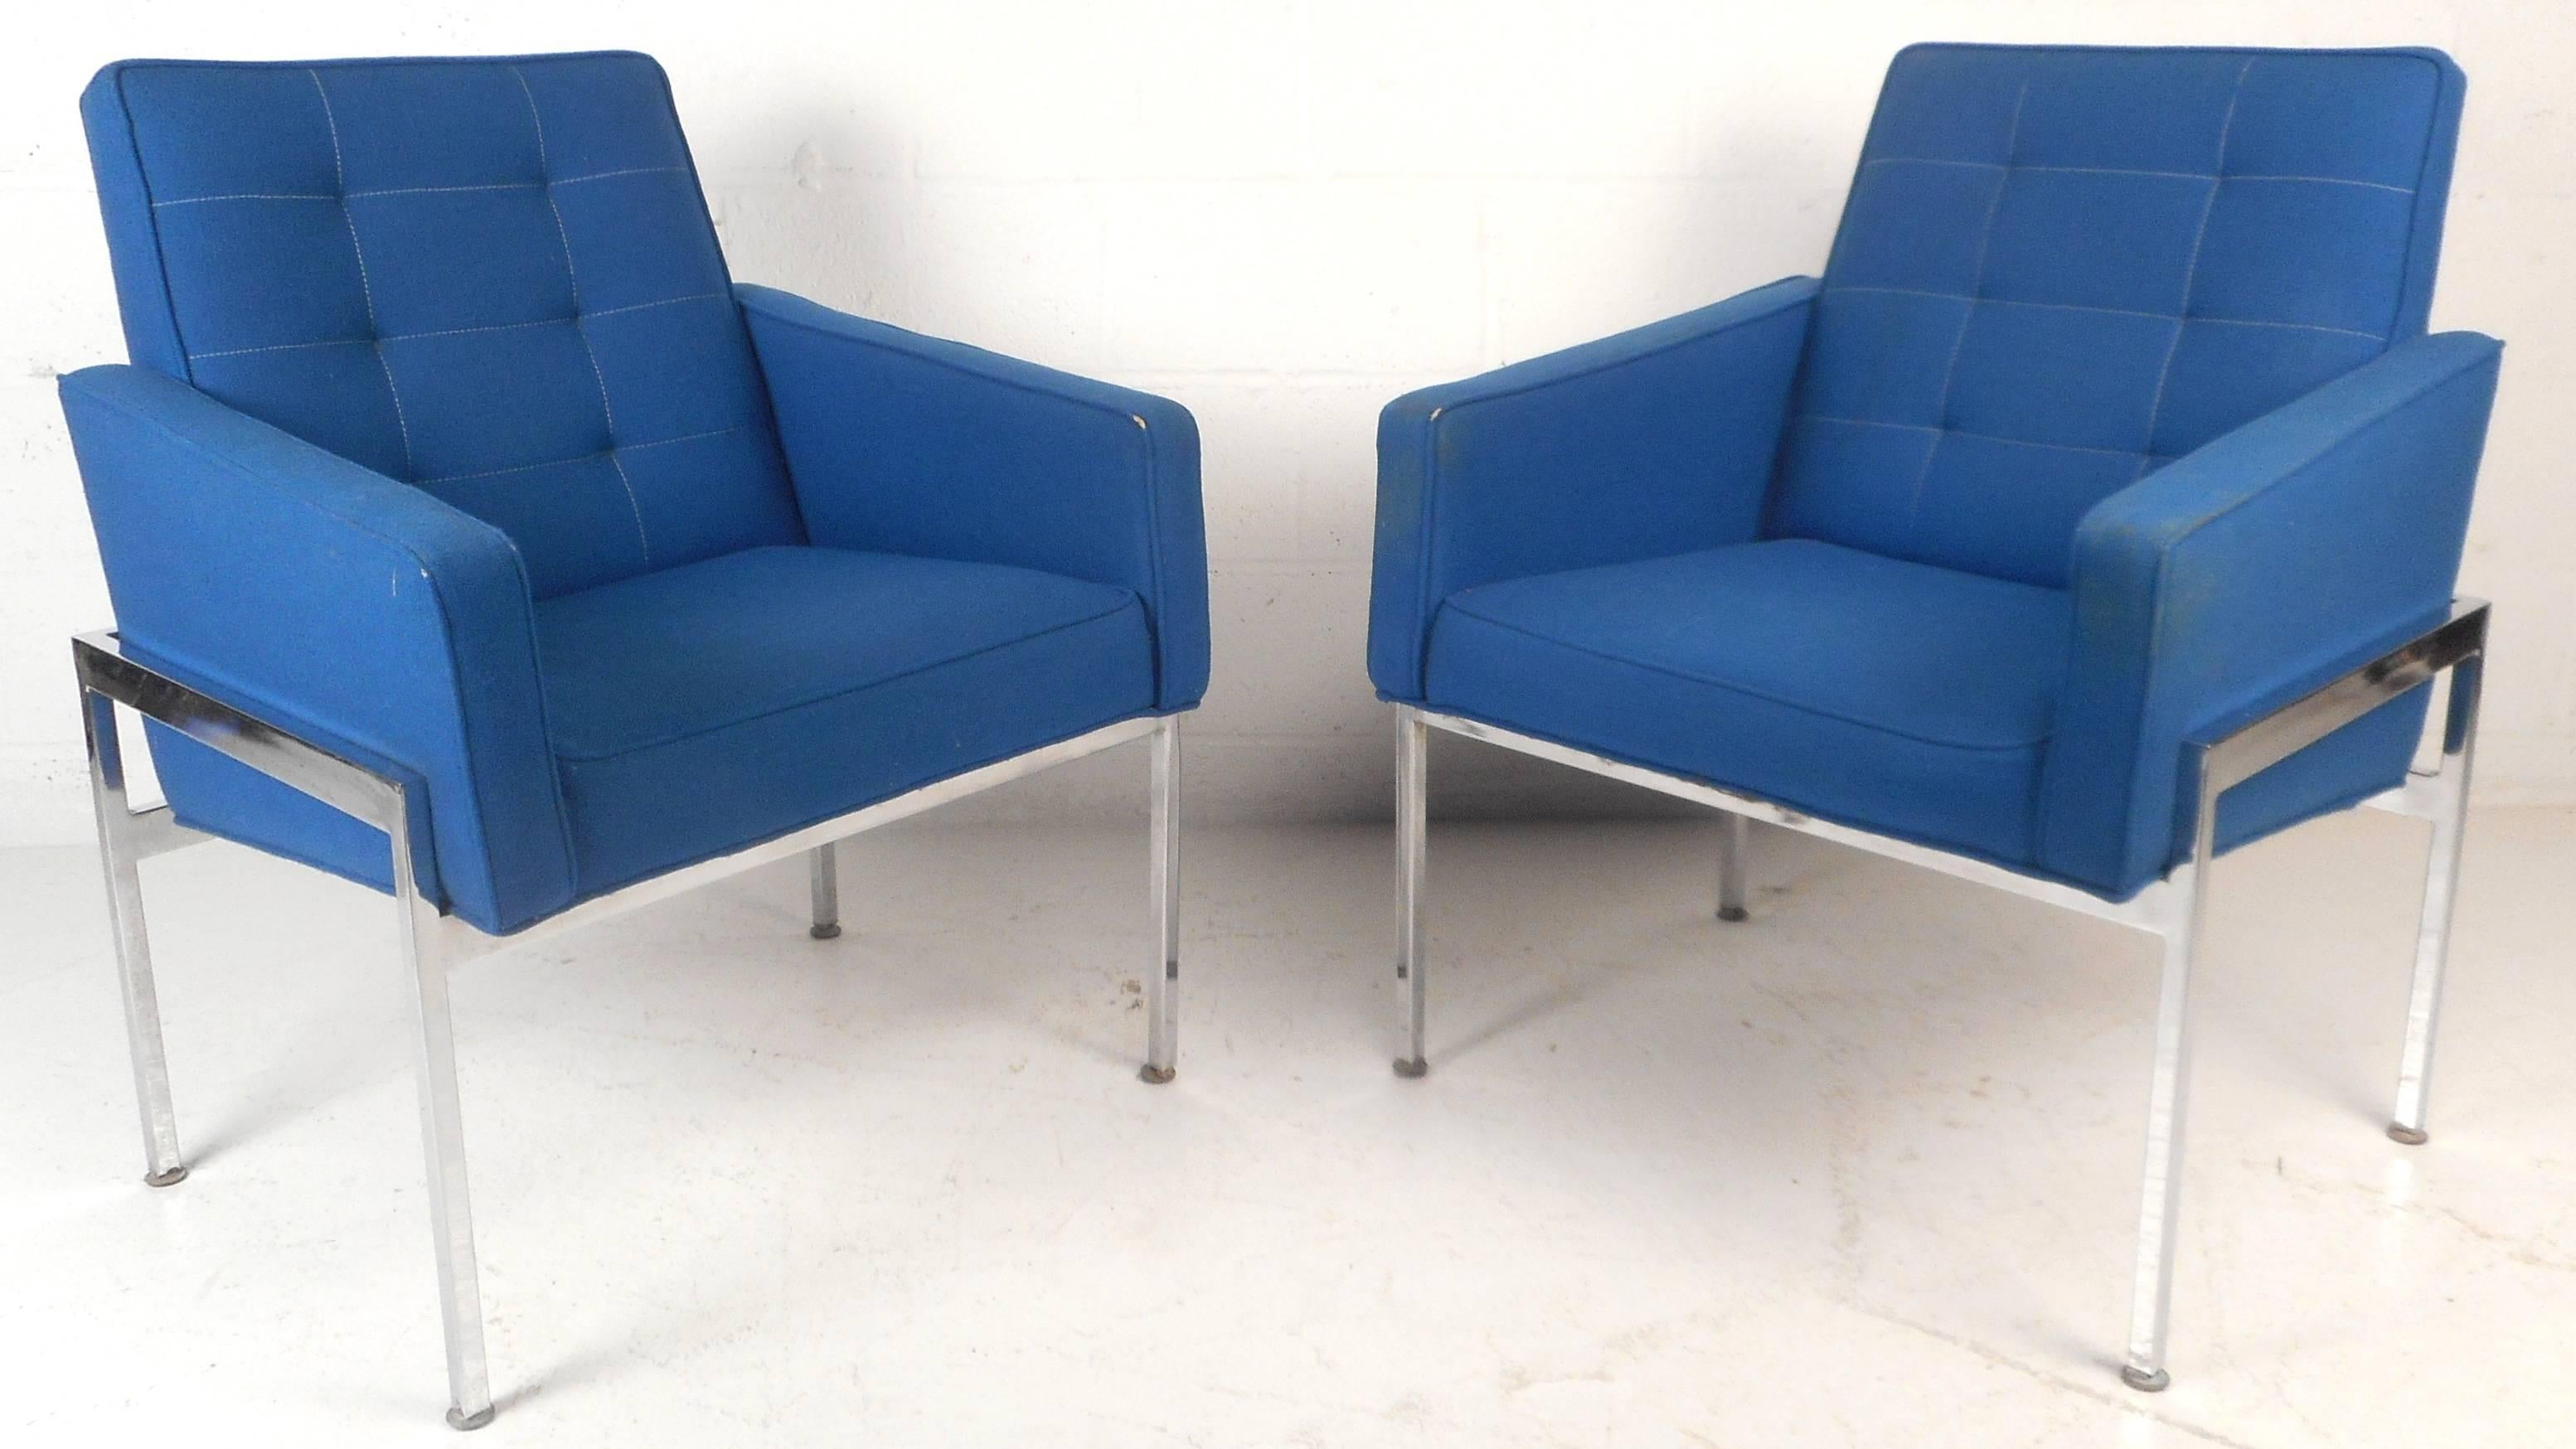 Pair of Mid-Century Modern Chrome Frame Tufted Lounge Chairs For Sale 2